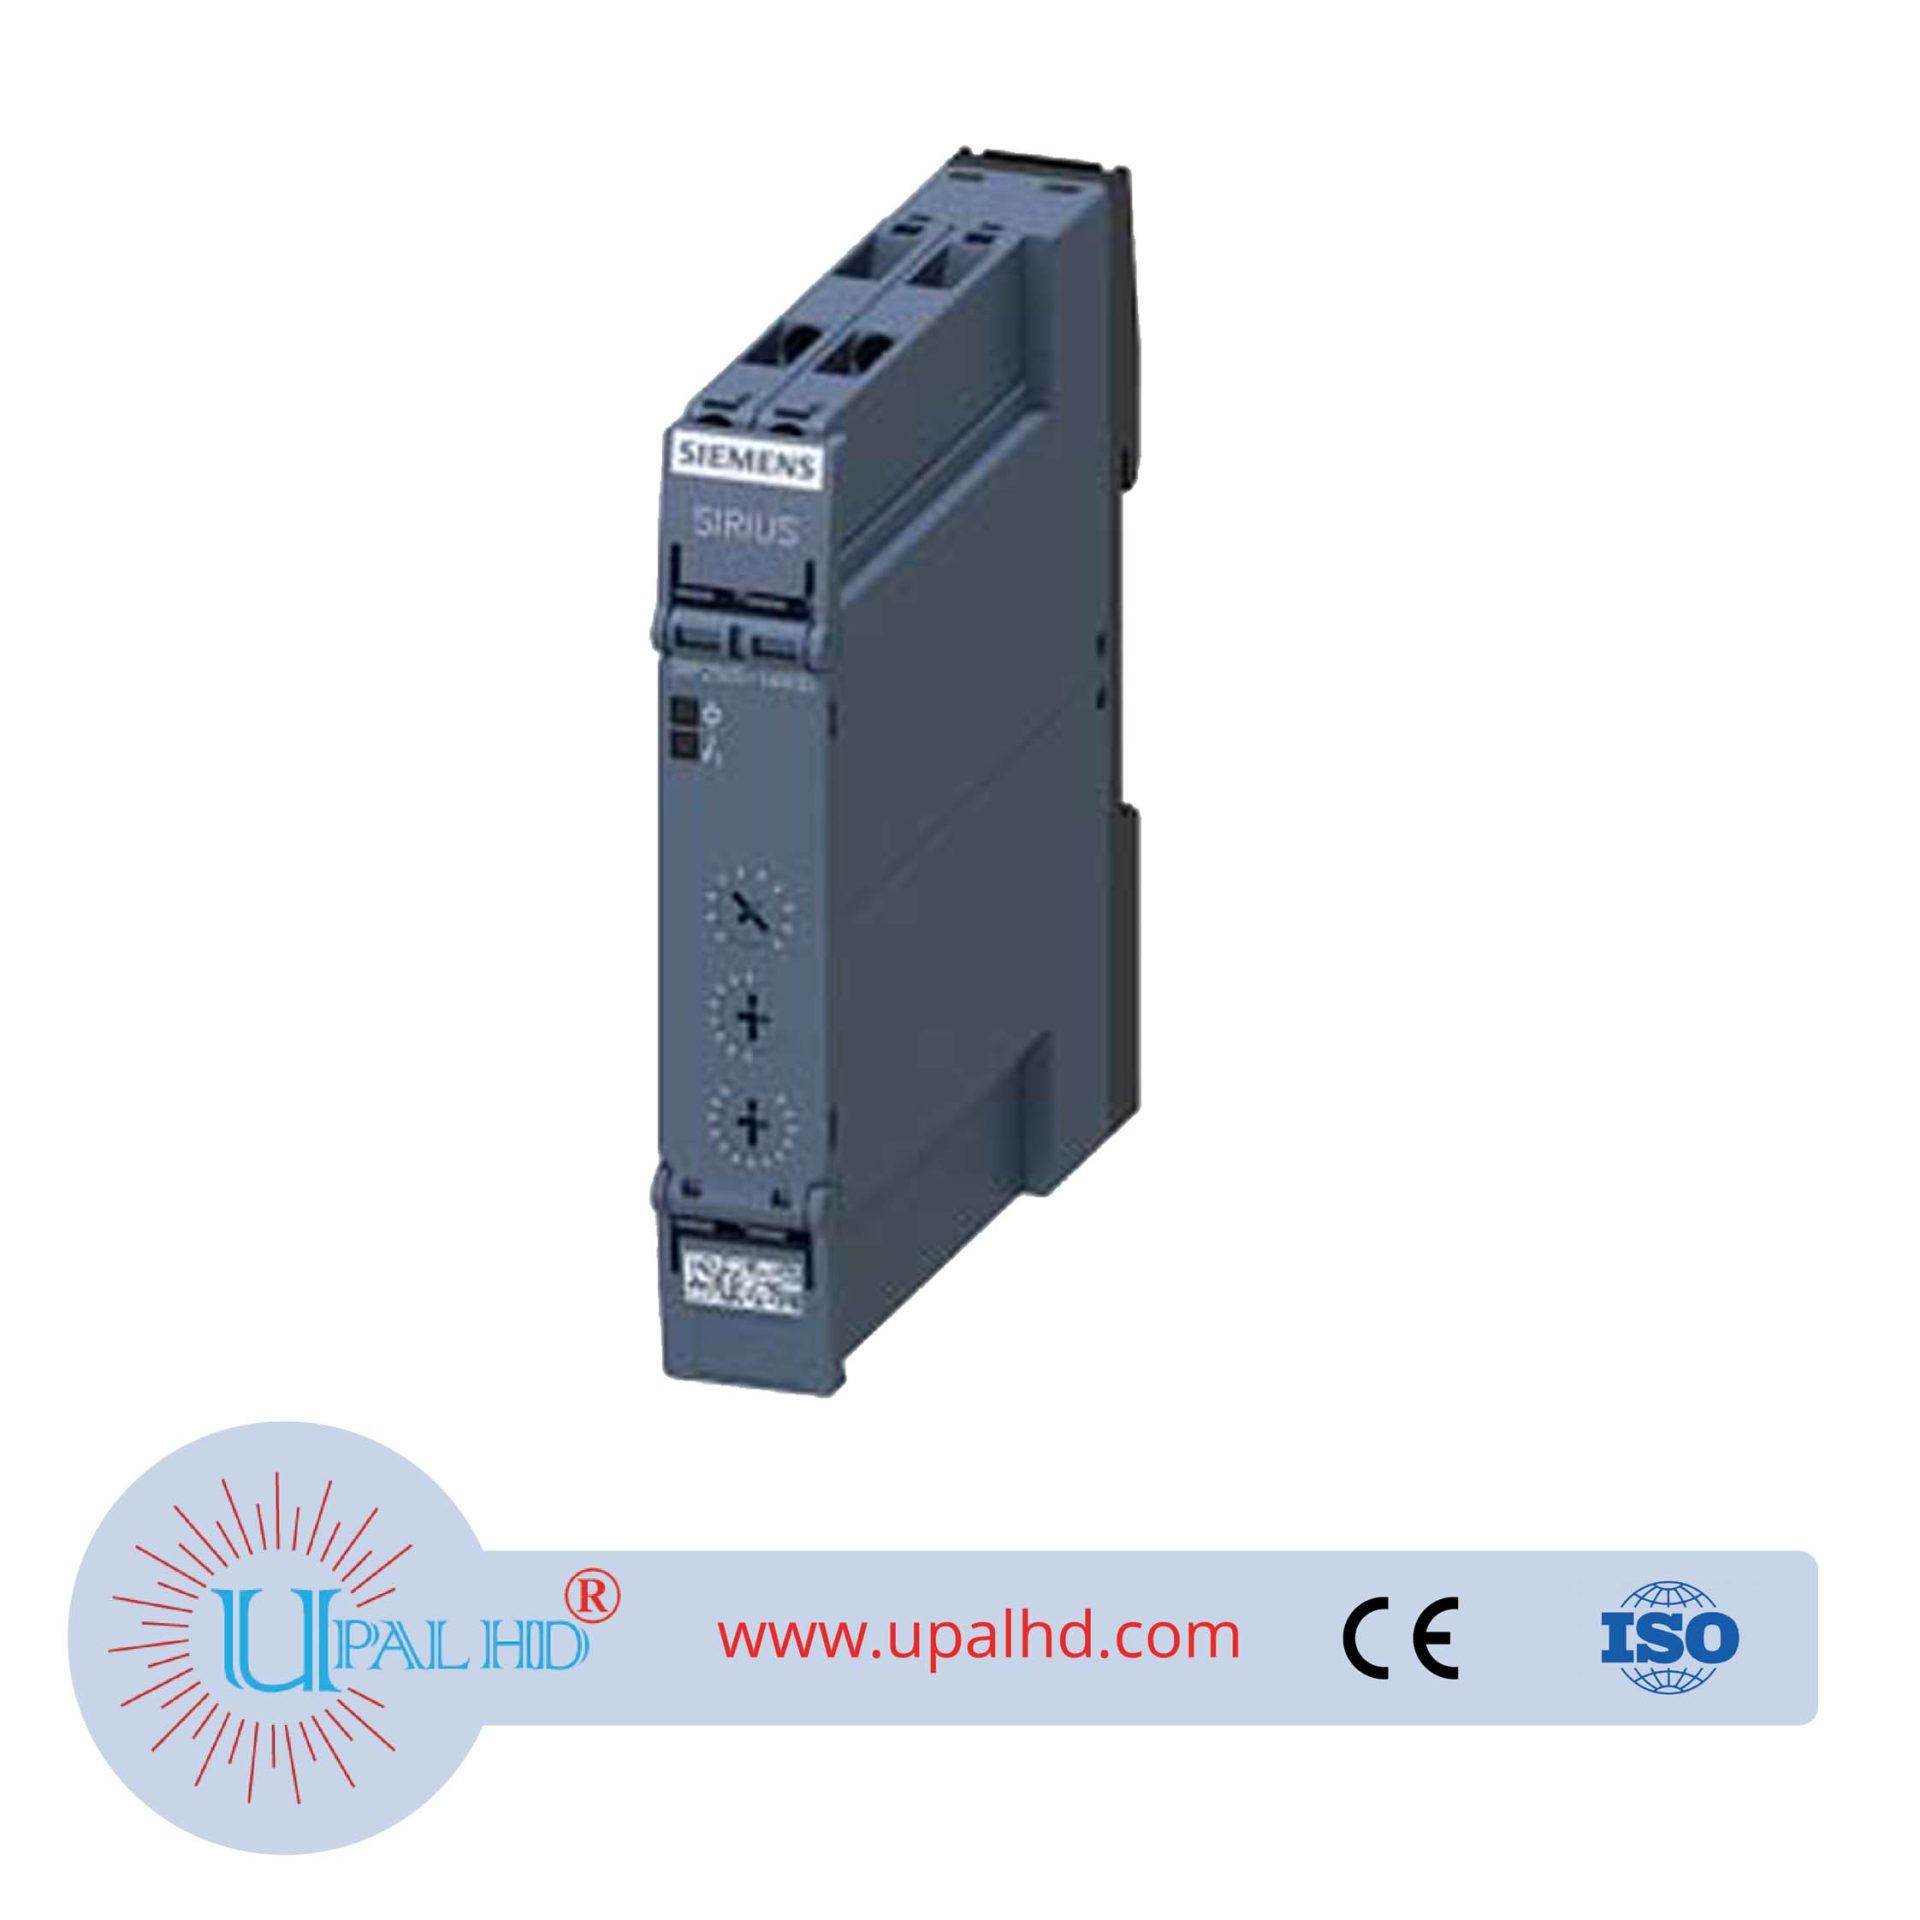 Futures – time relay, flasher relay asynchronous 1 switching contact, 2x 7 time ranges, 0.05s- 100h